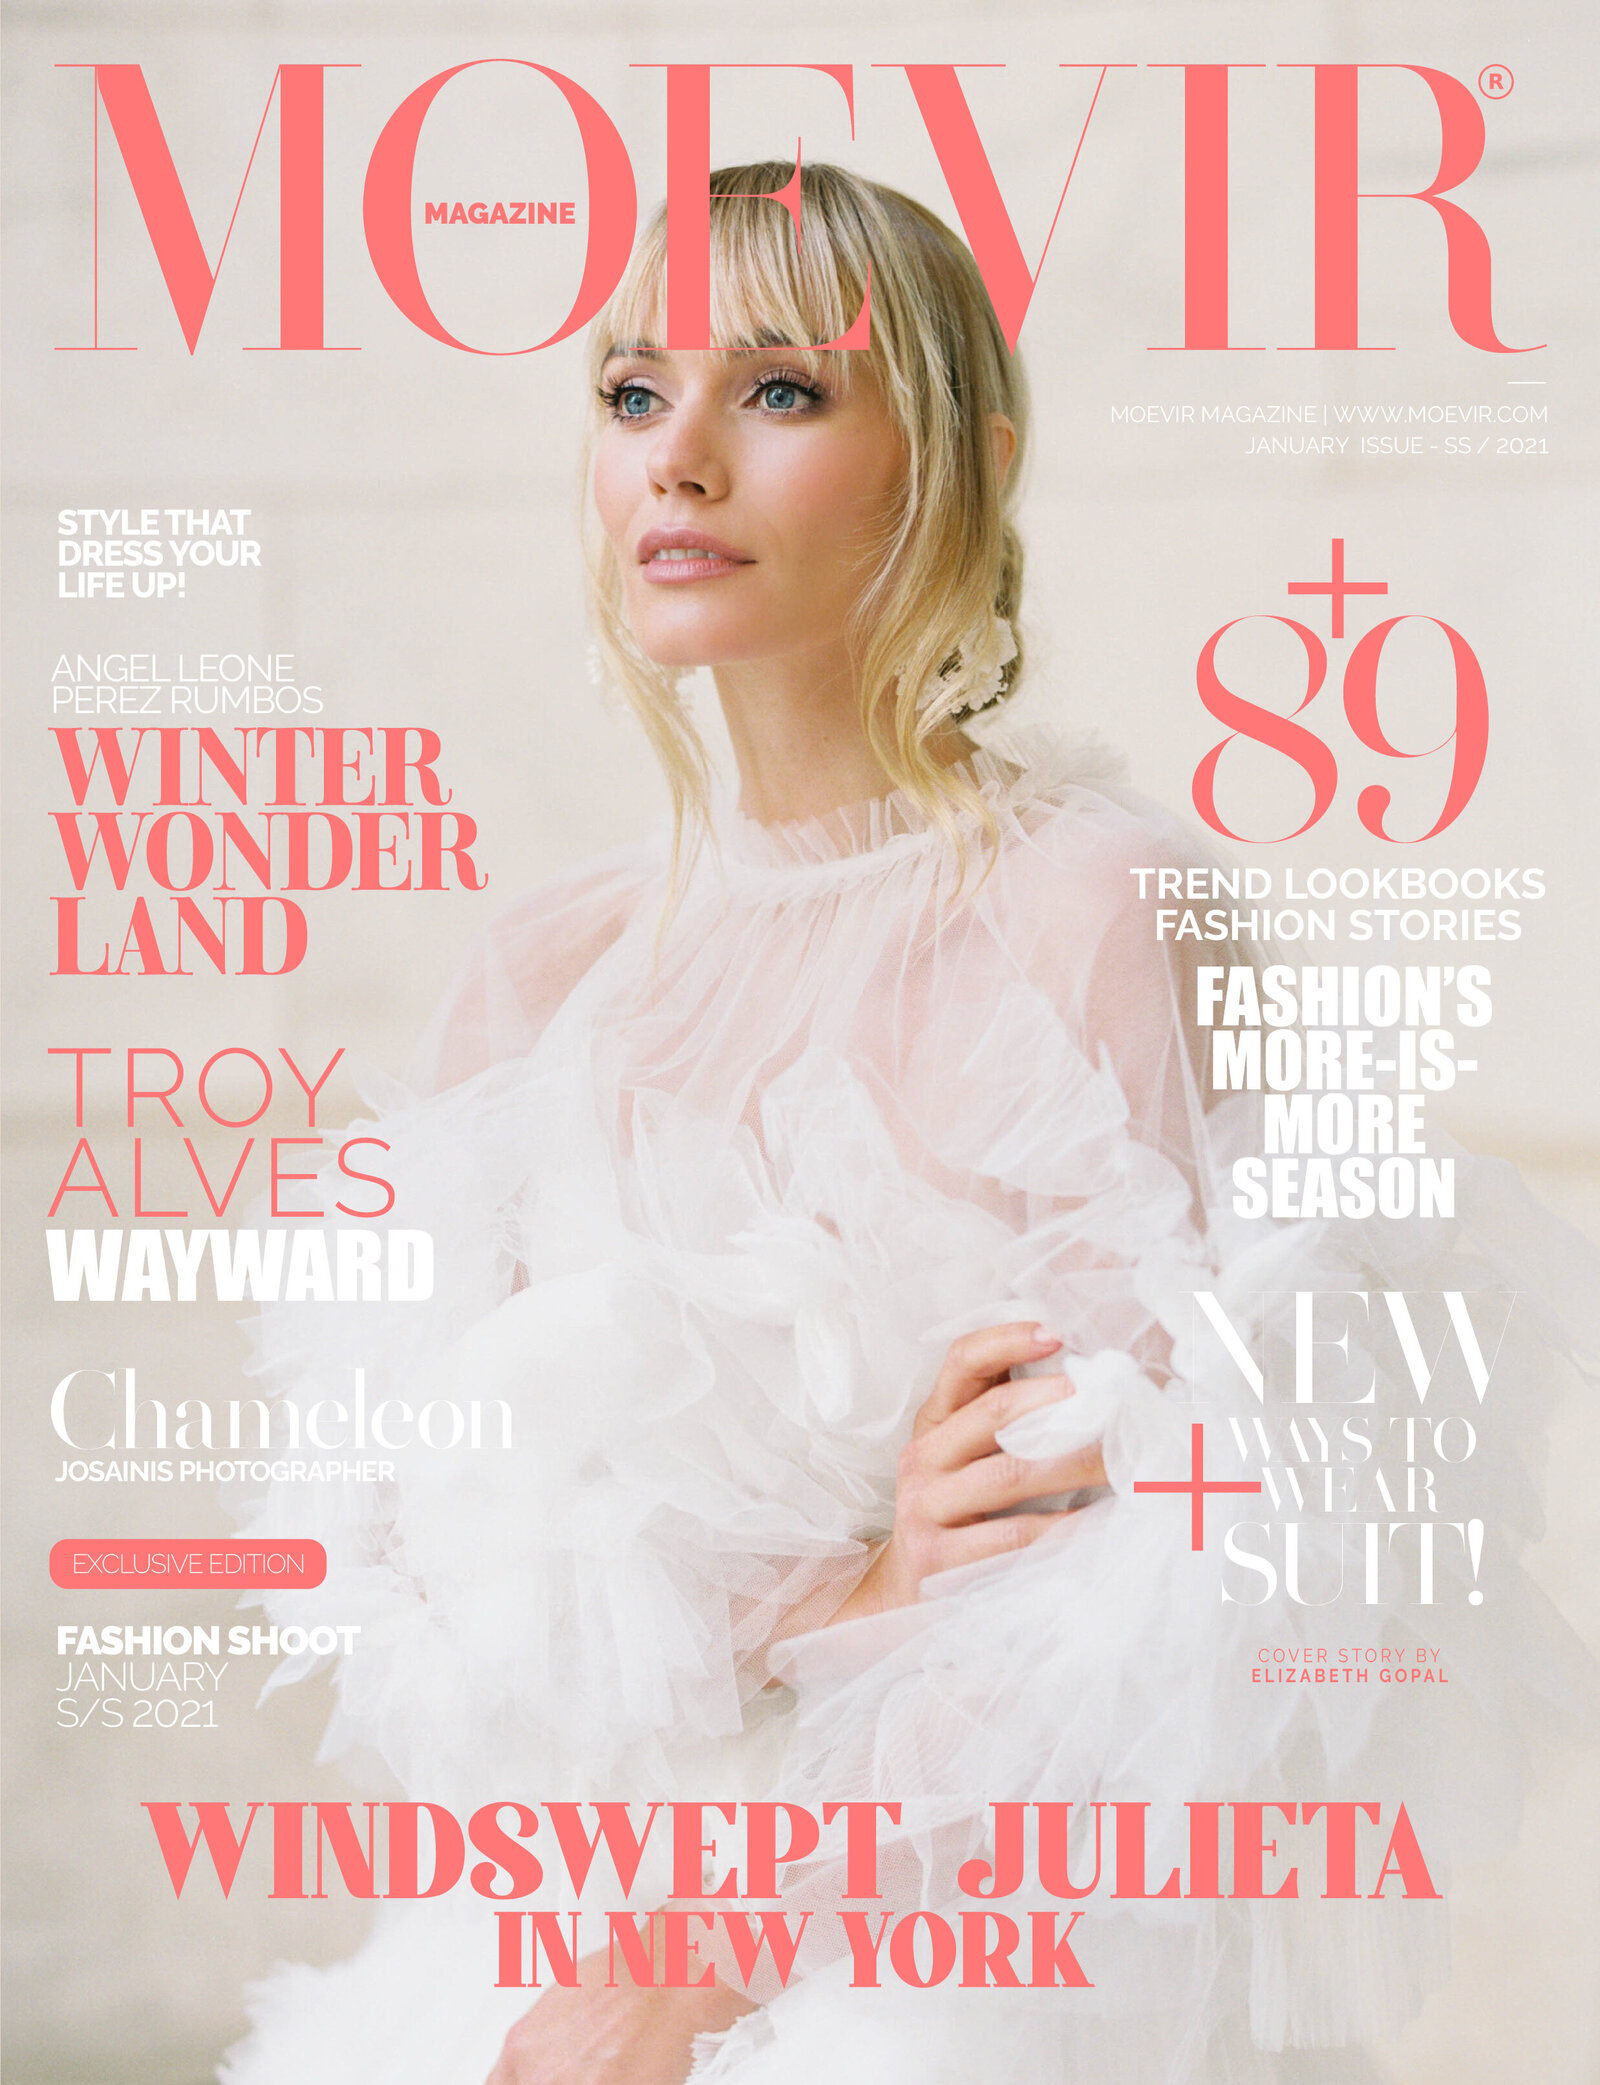 A Moevir Magazine January Issue 20211 copy